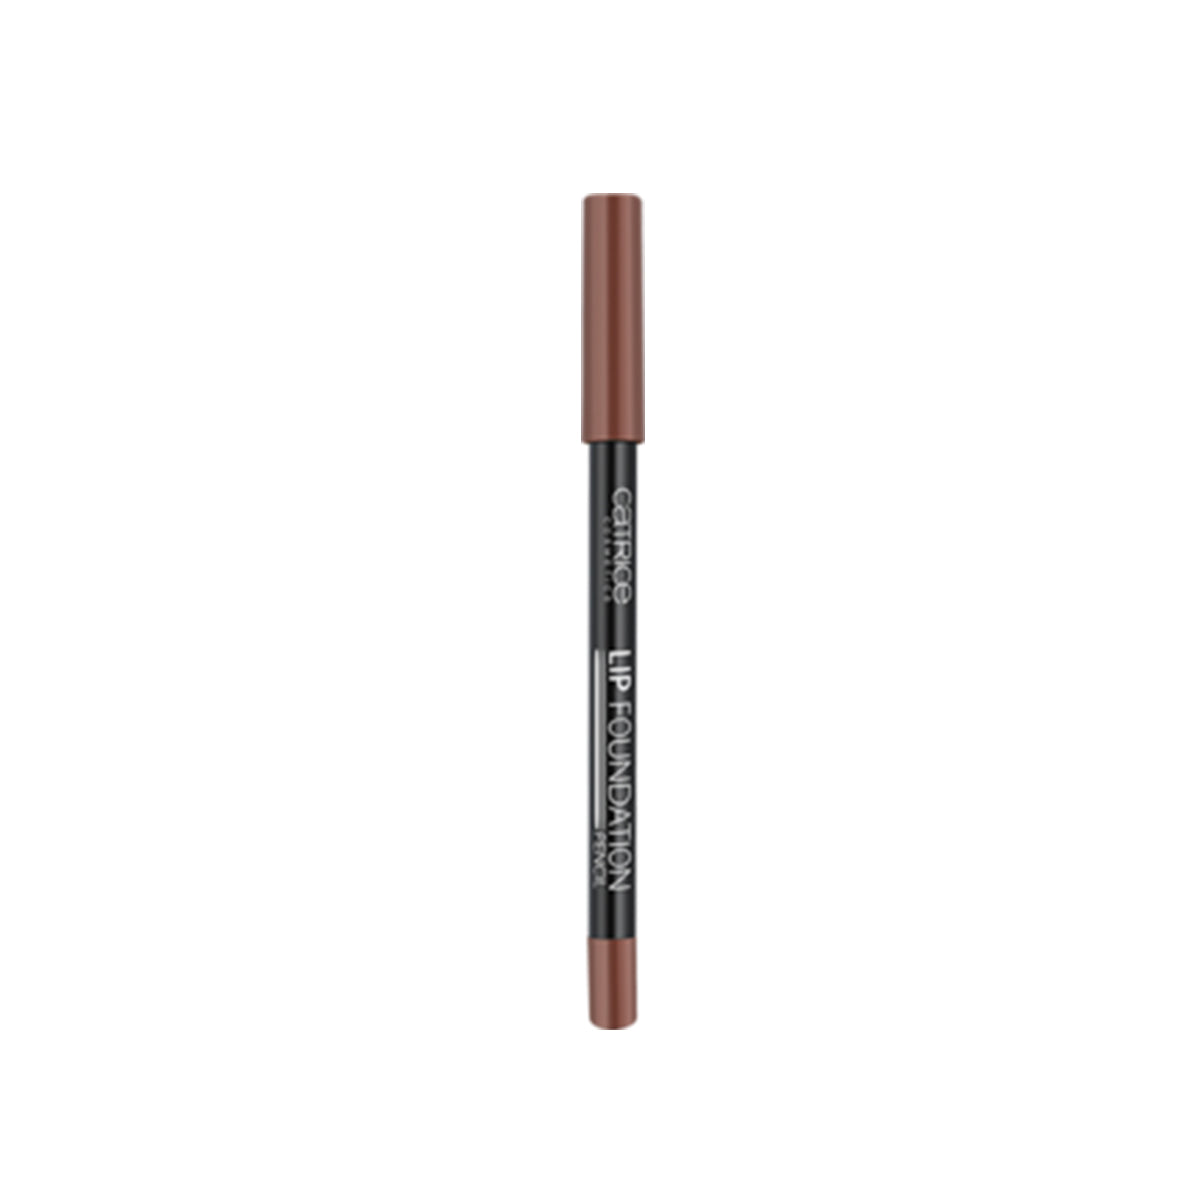 LIP FOUNDATION PENCIL 040 I TAKE YOU TO THE CHOCOLATE SHOP - CATRICE